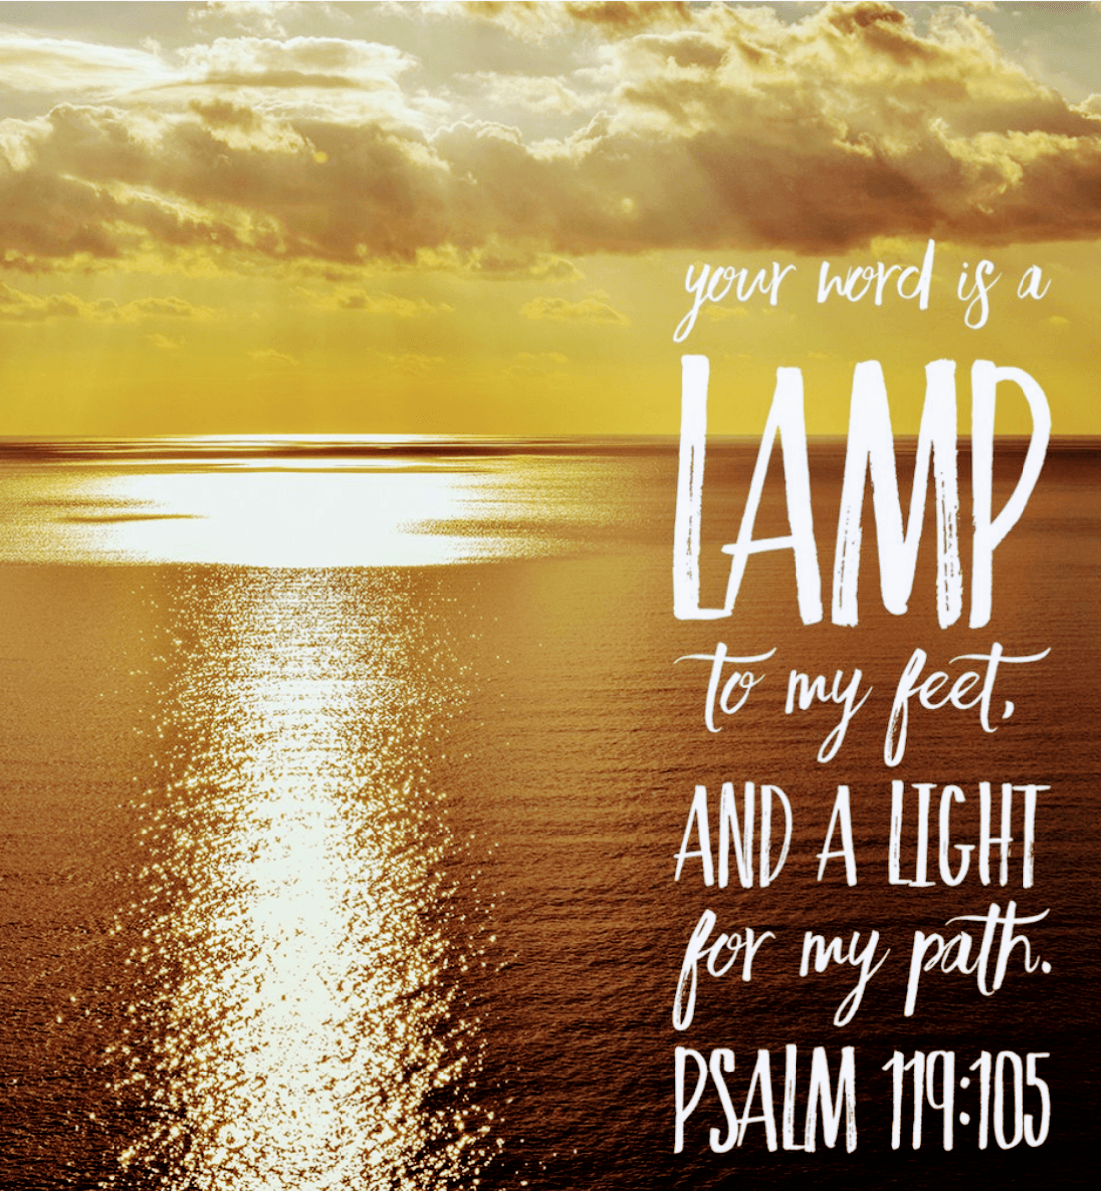 Thy word is a lamp unto my feet, and a light unto my path